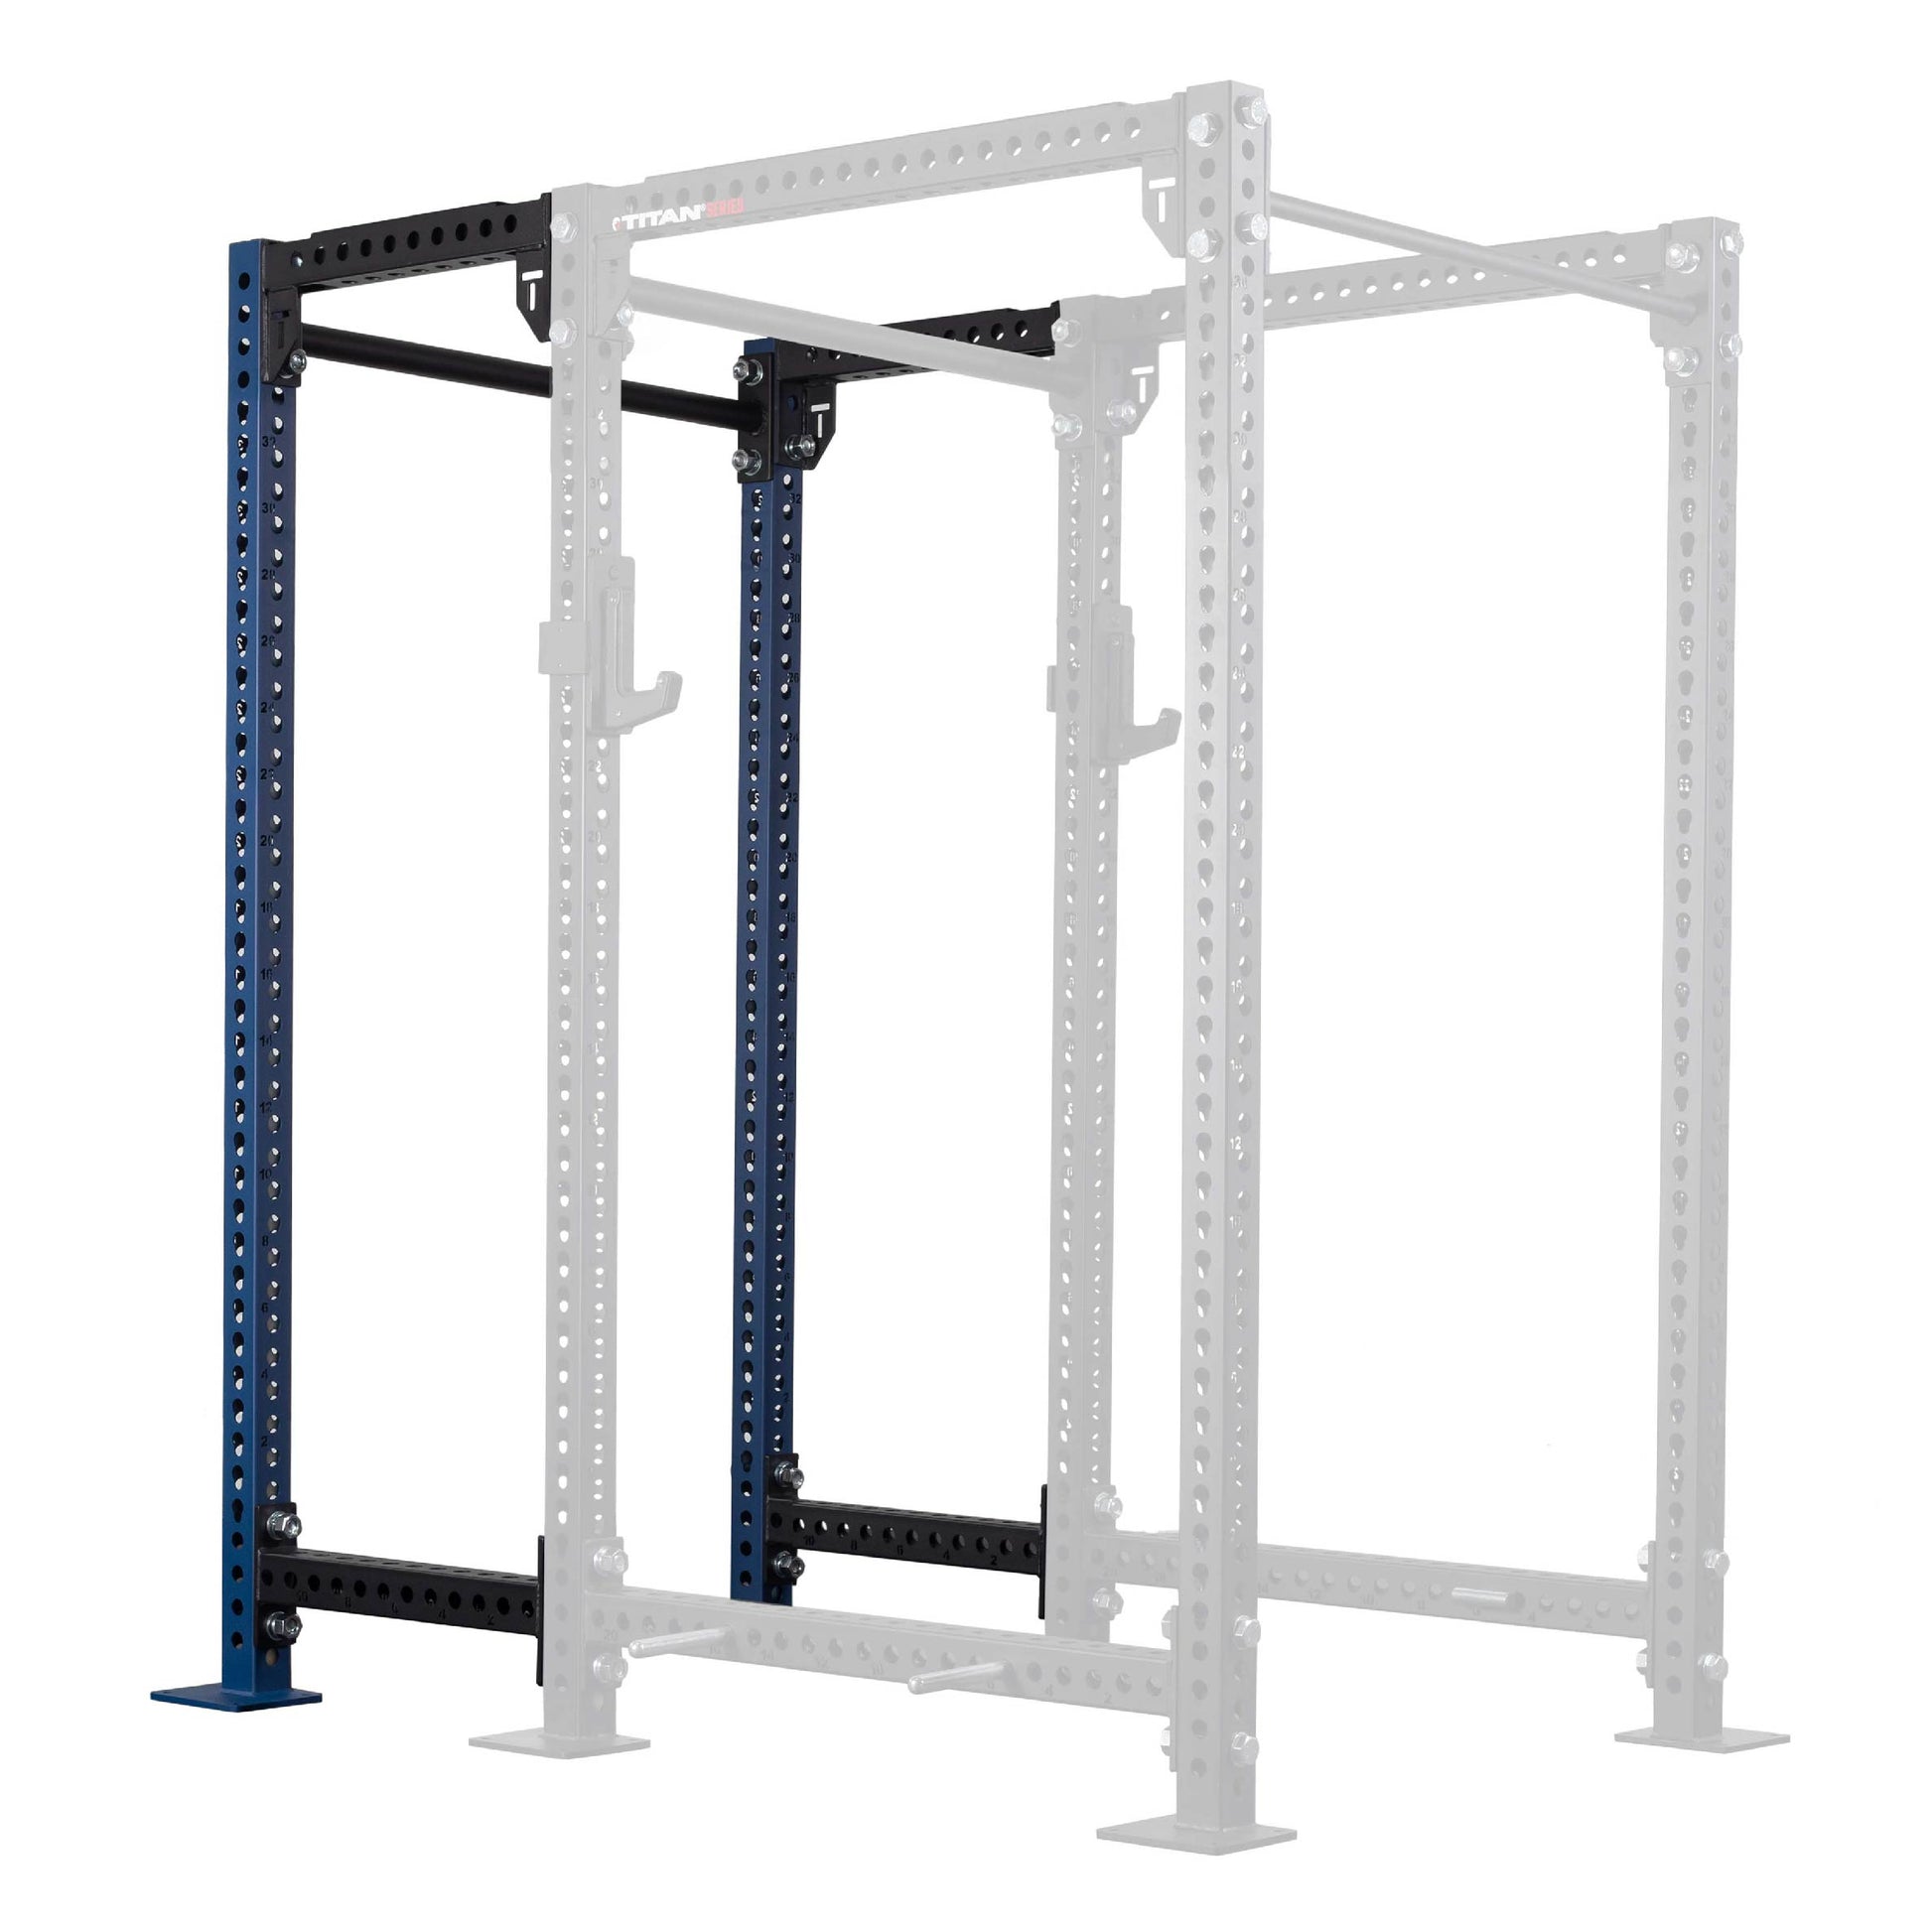 TITAN Series 24" Extension Kit - Extension Color: Navy - Extension Height: 90" - Crossmember: 2" Fat Pull-Up Bar | Navy / 90" / 2" Fat Pull-Up Bar